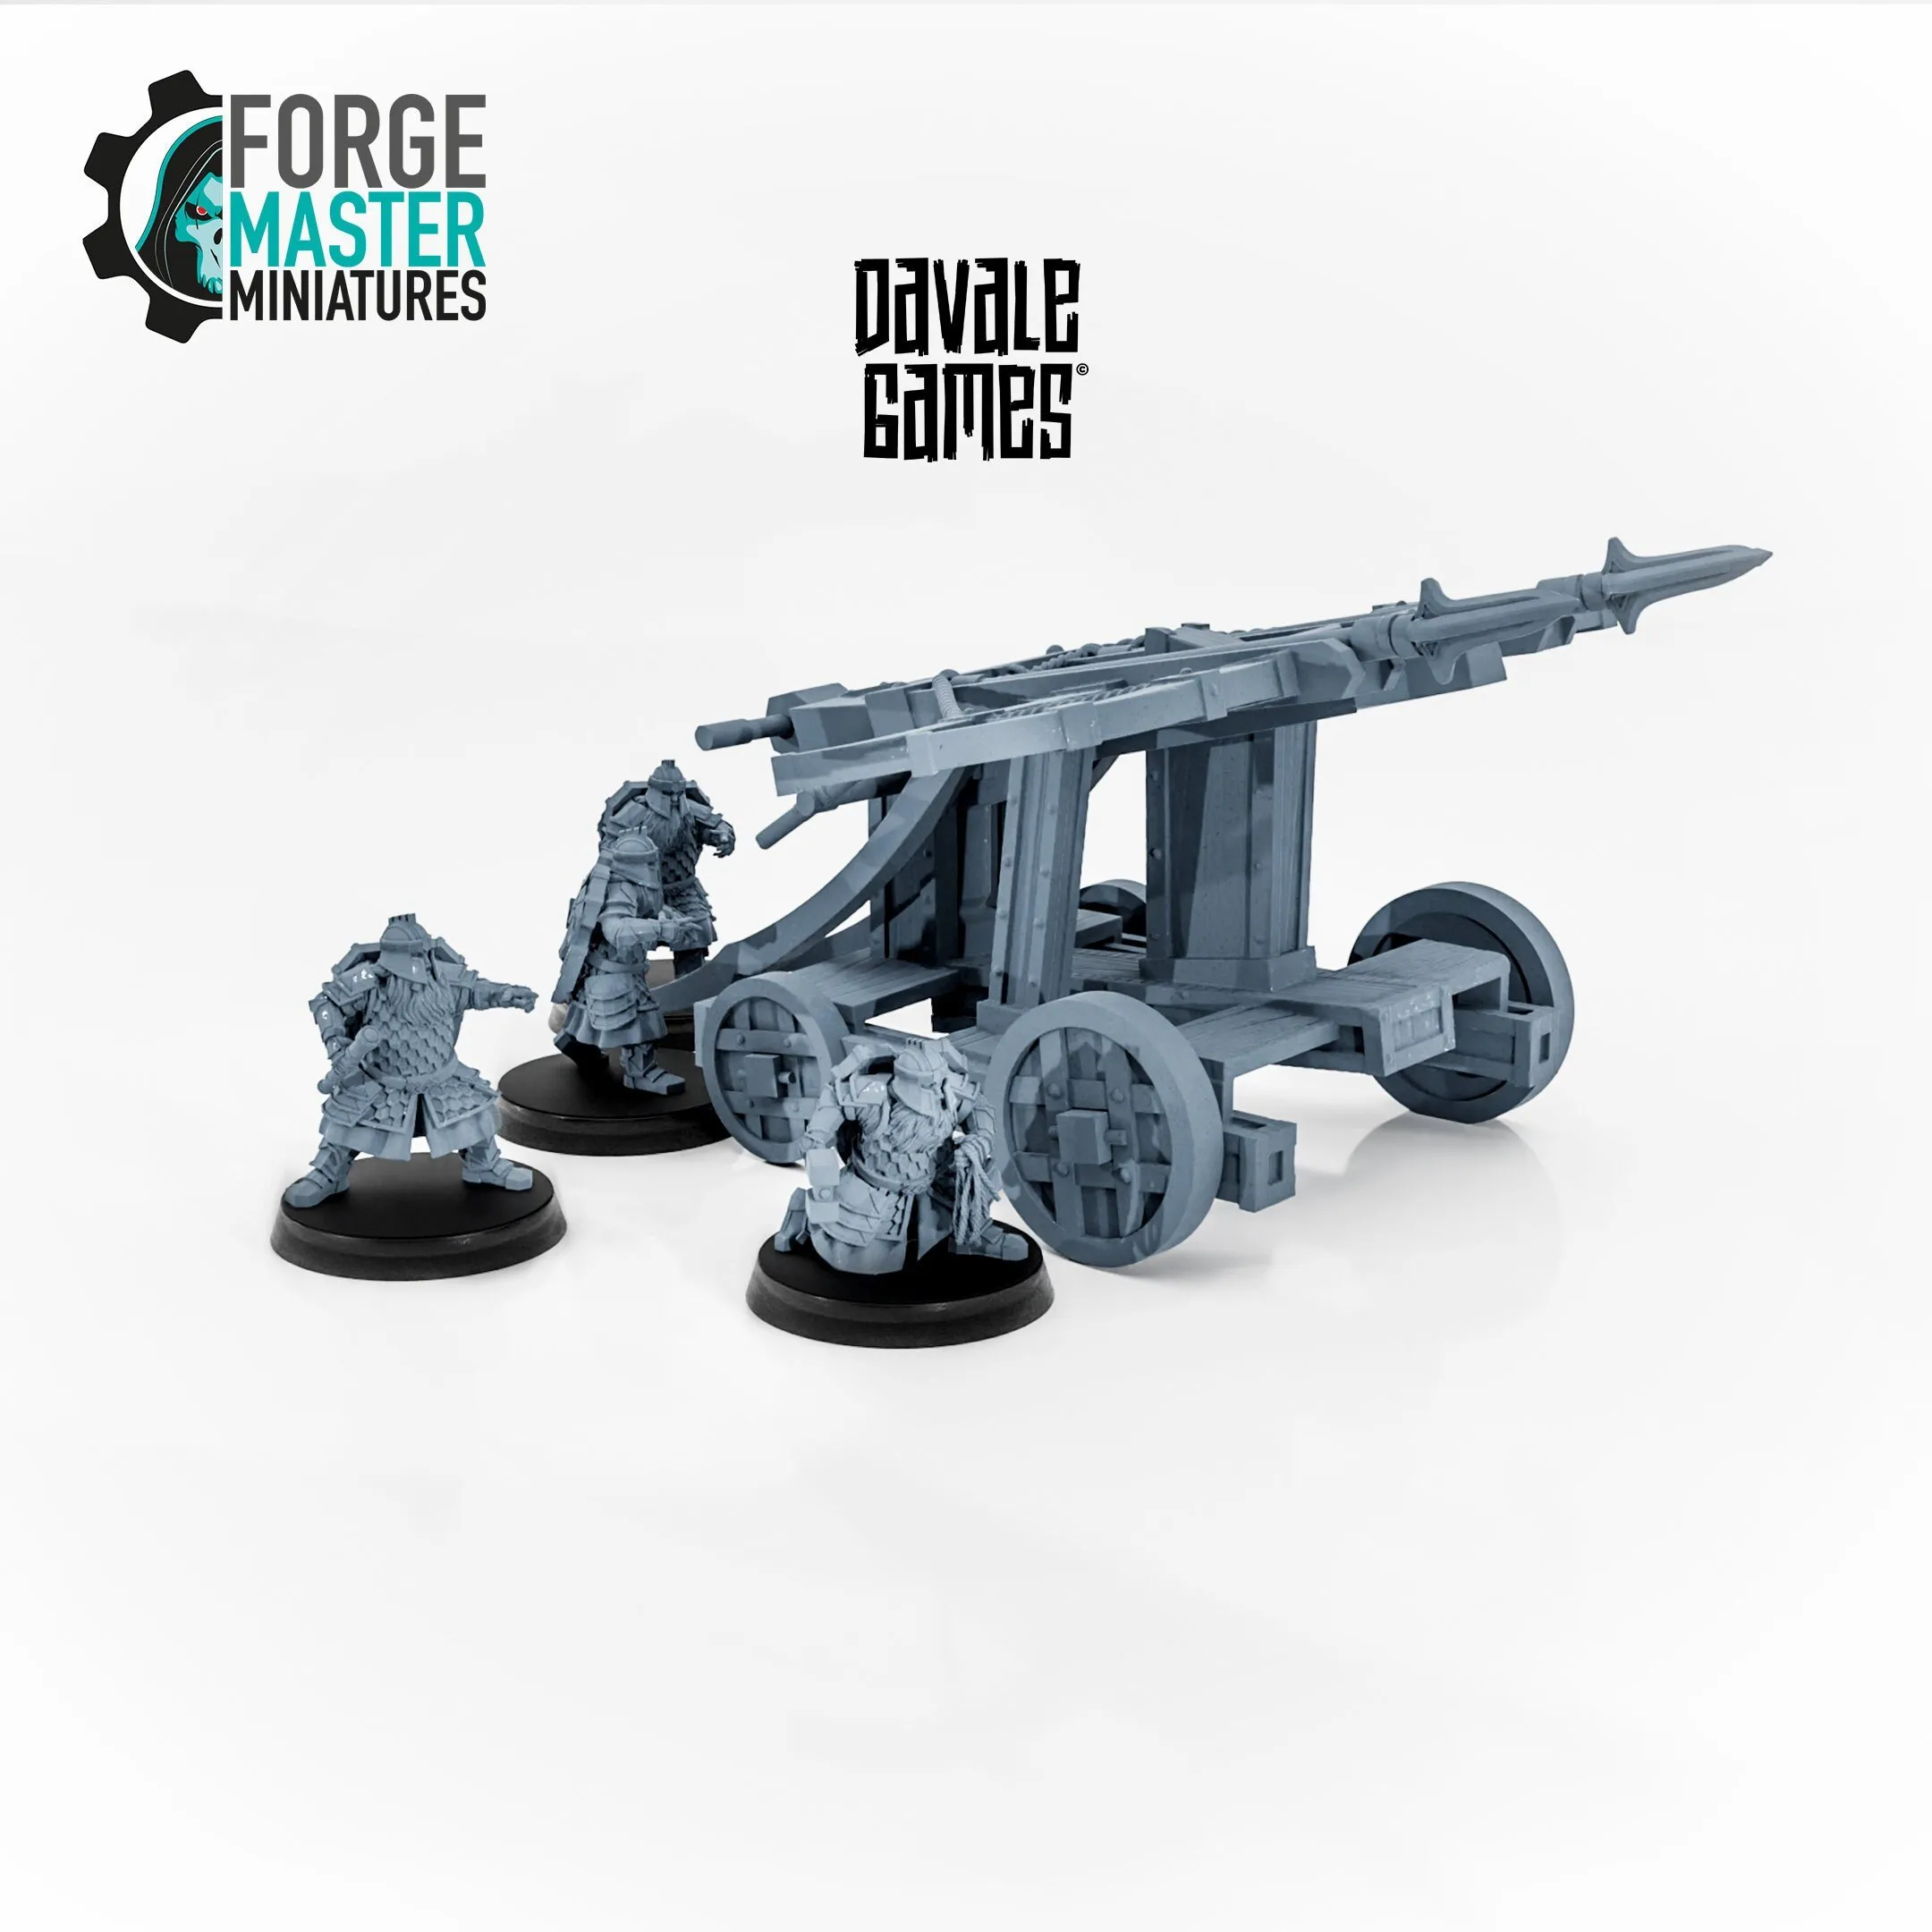 Silver Dwarves Ballista wargaming miniature designed by Davale Games 3D Printed by Forgemaster Miniatures